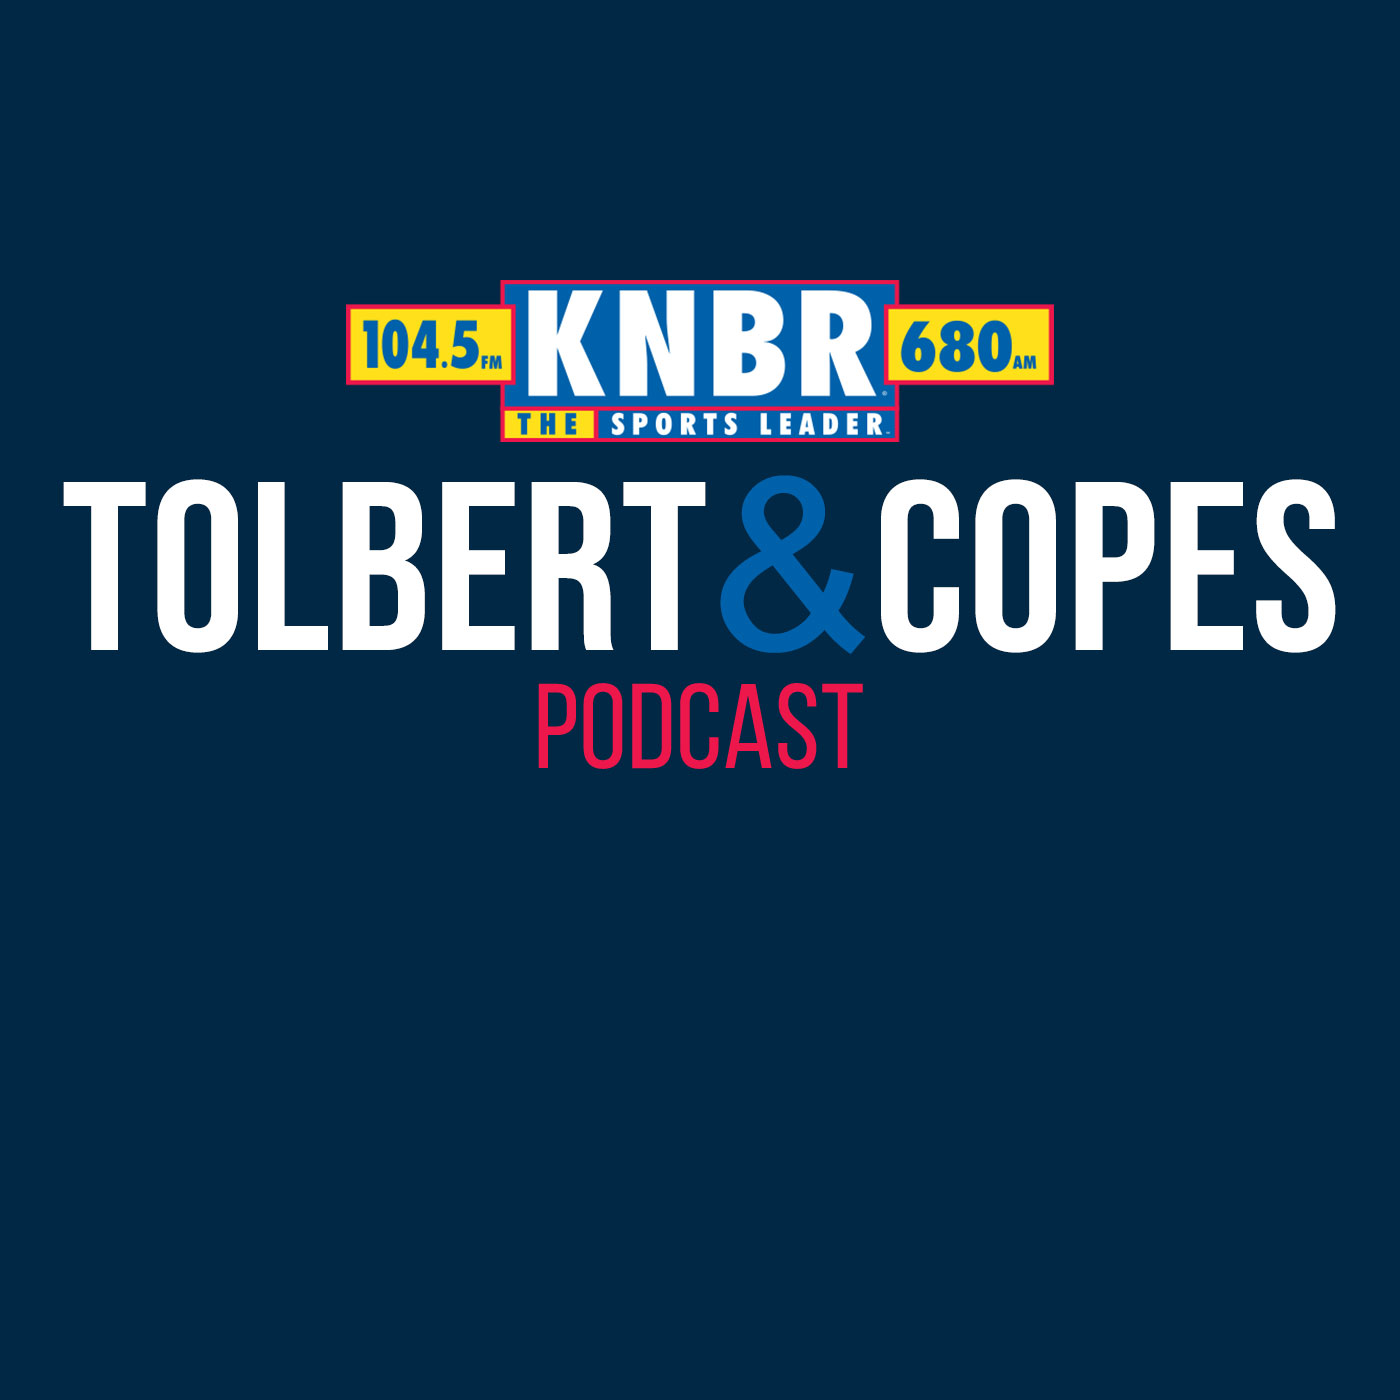 3-15 Ken Pomeroy previews the NCAA Tournament Bracket with Tolbert & Copes